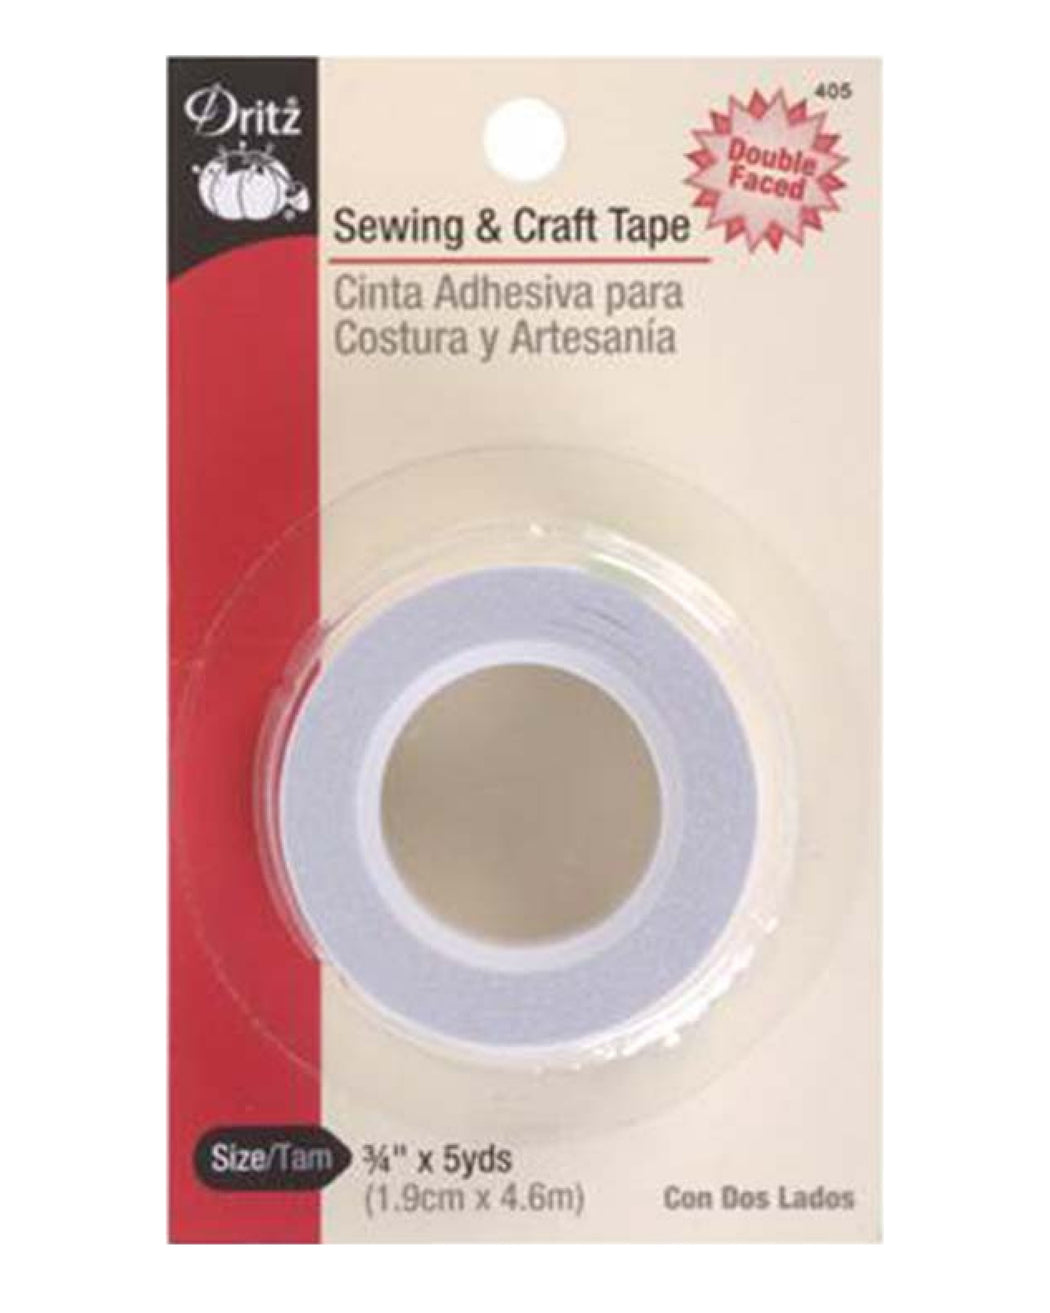 Sewing & Craft Tape - Zipper and Thread